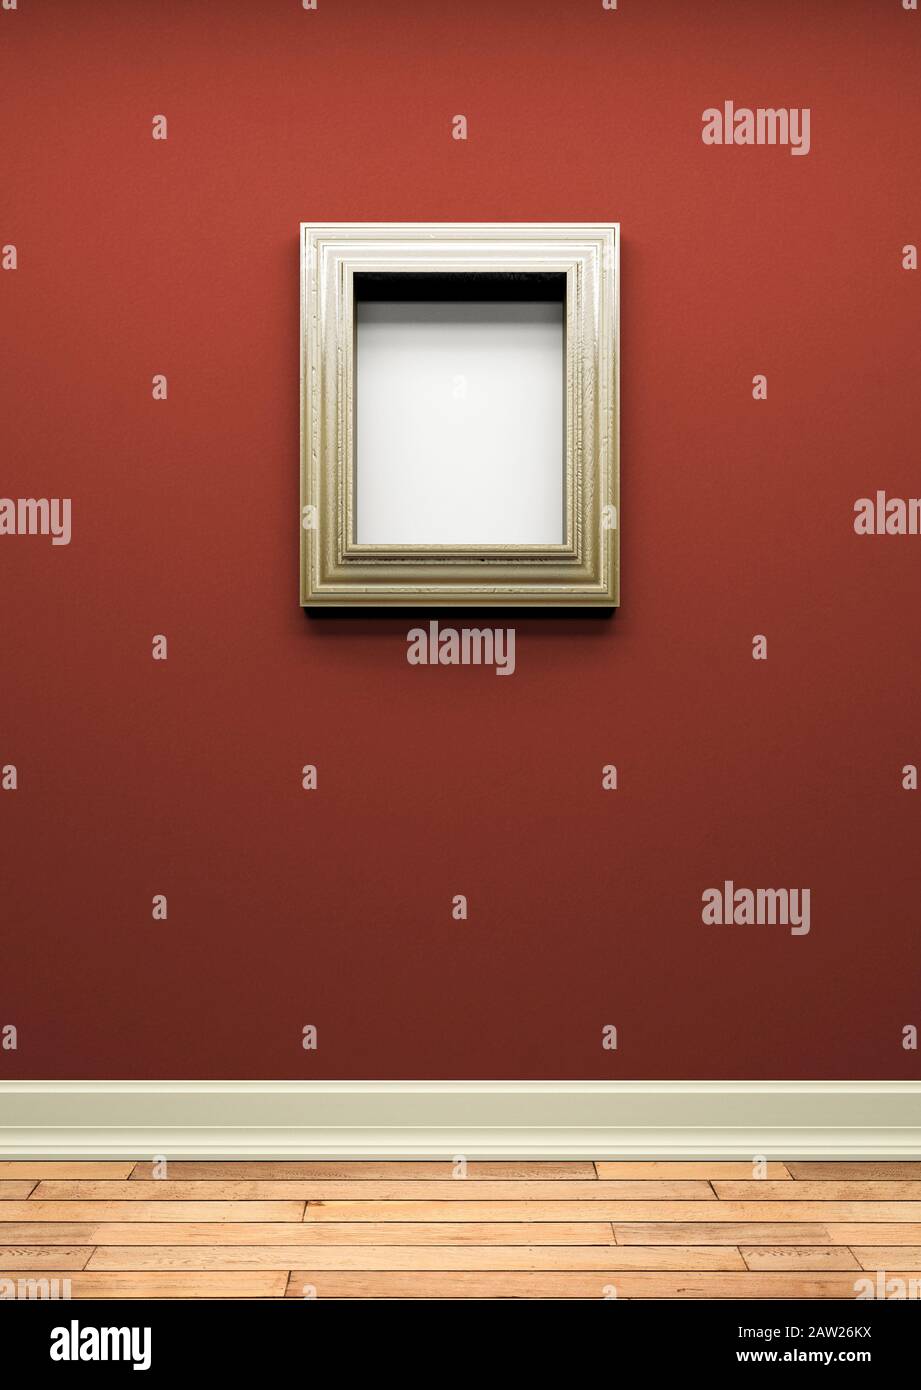 Thick blank metal picture frame on a red wall Stock Photo